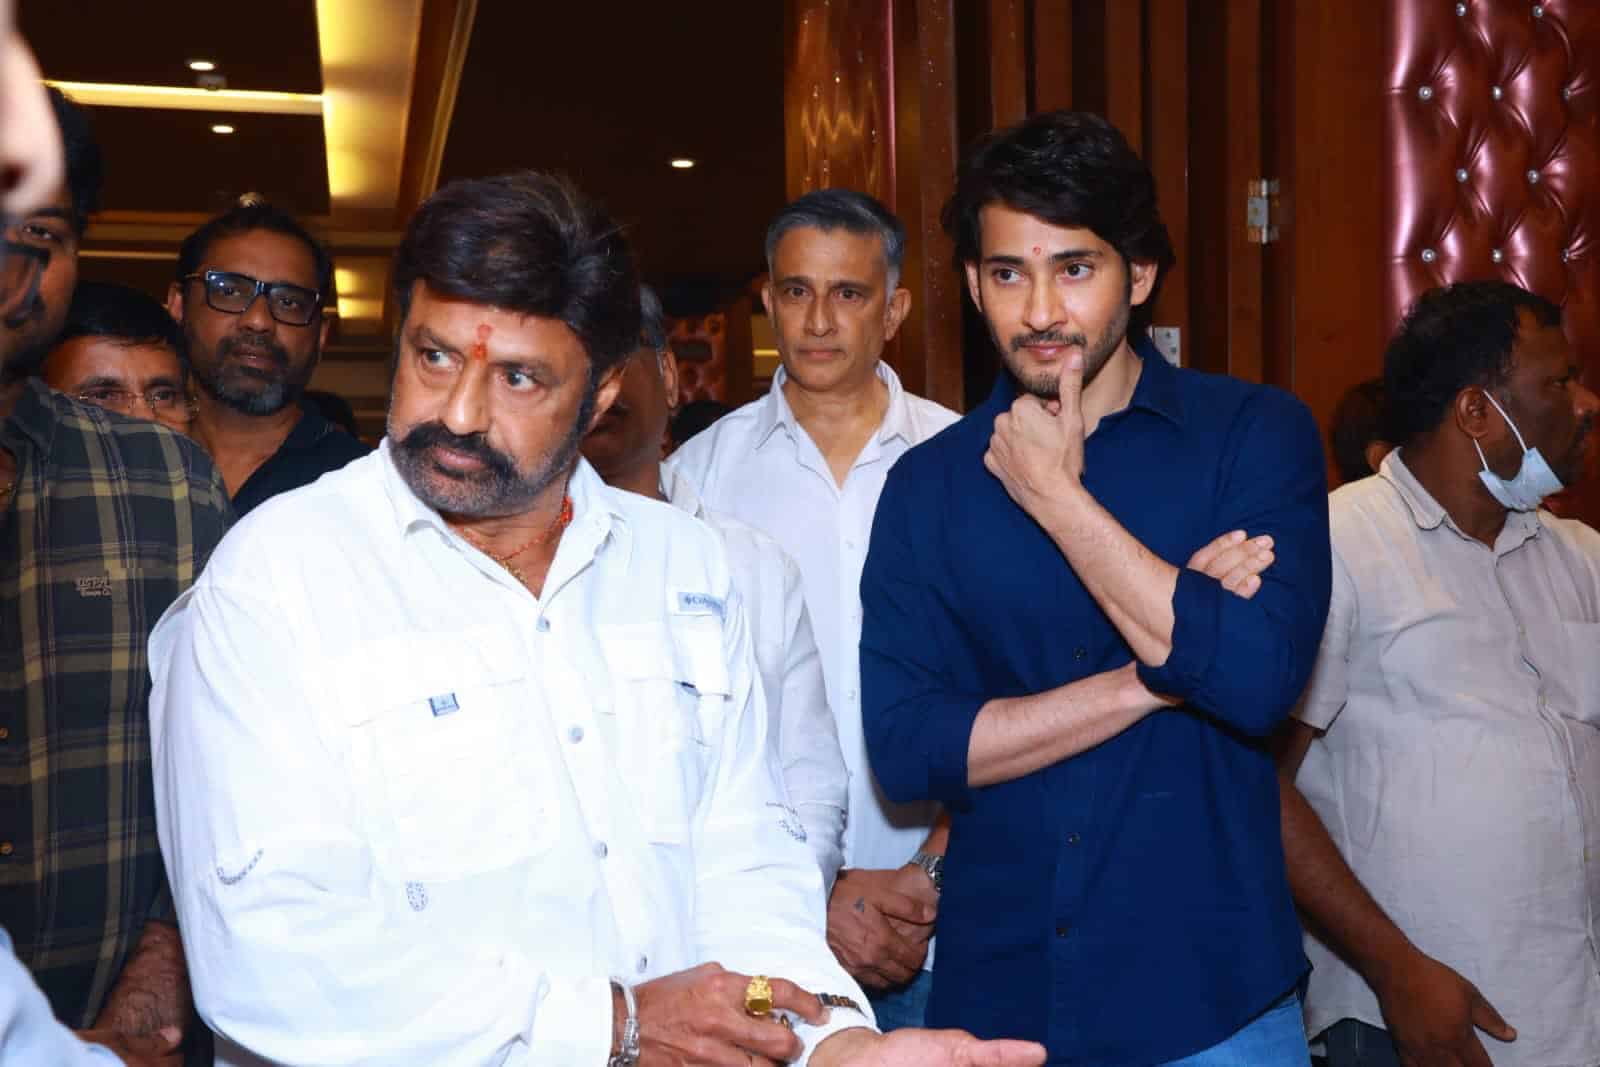 Balakrishna openly says that superstar Mahesh Babu is his favorite hero in Unstoppable show